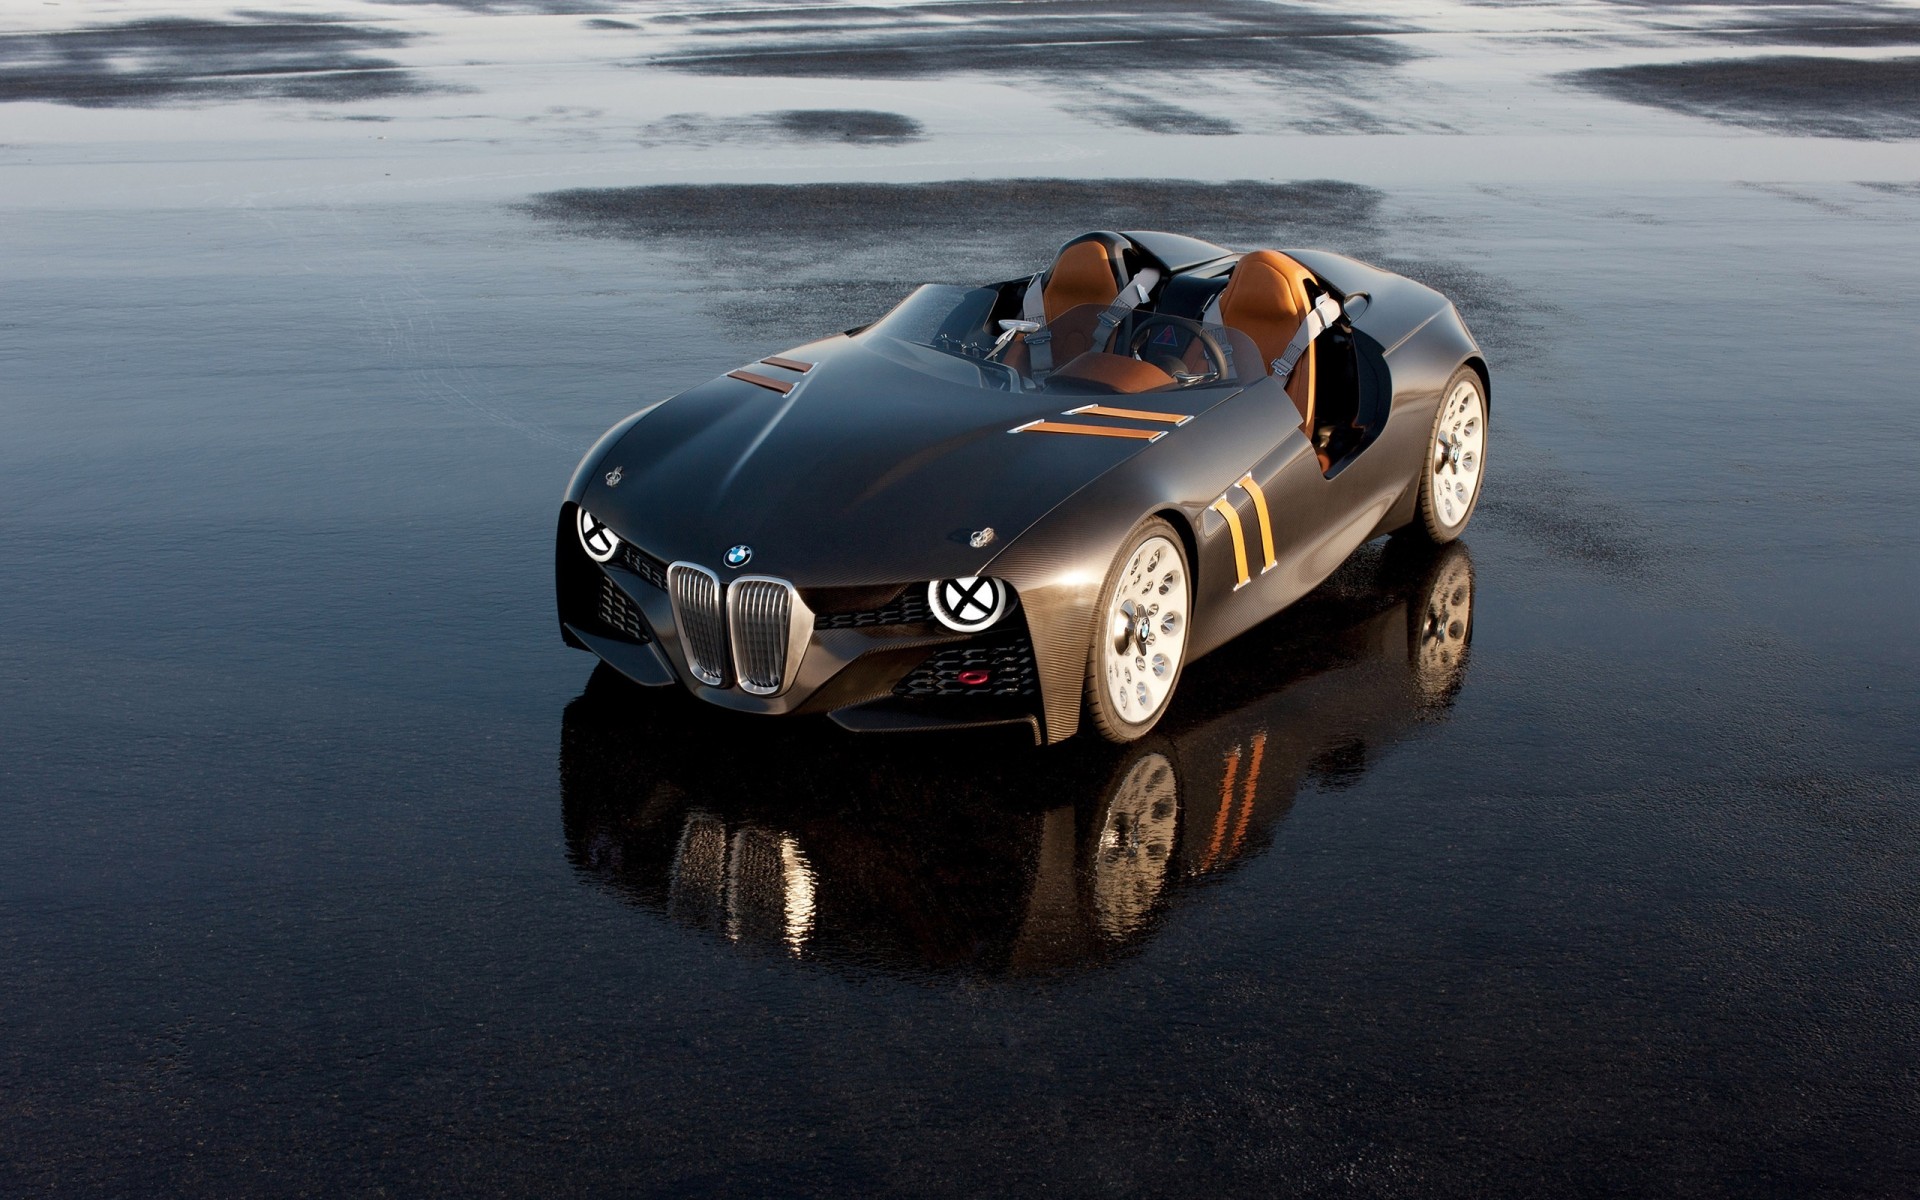 bmw car vehicle hurry action transportation system competition race bmw 328 hommage